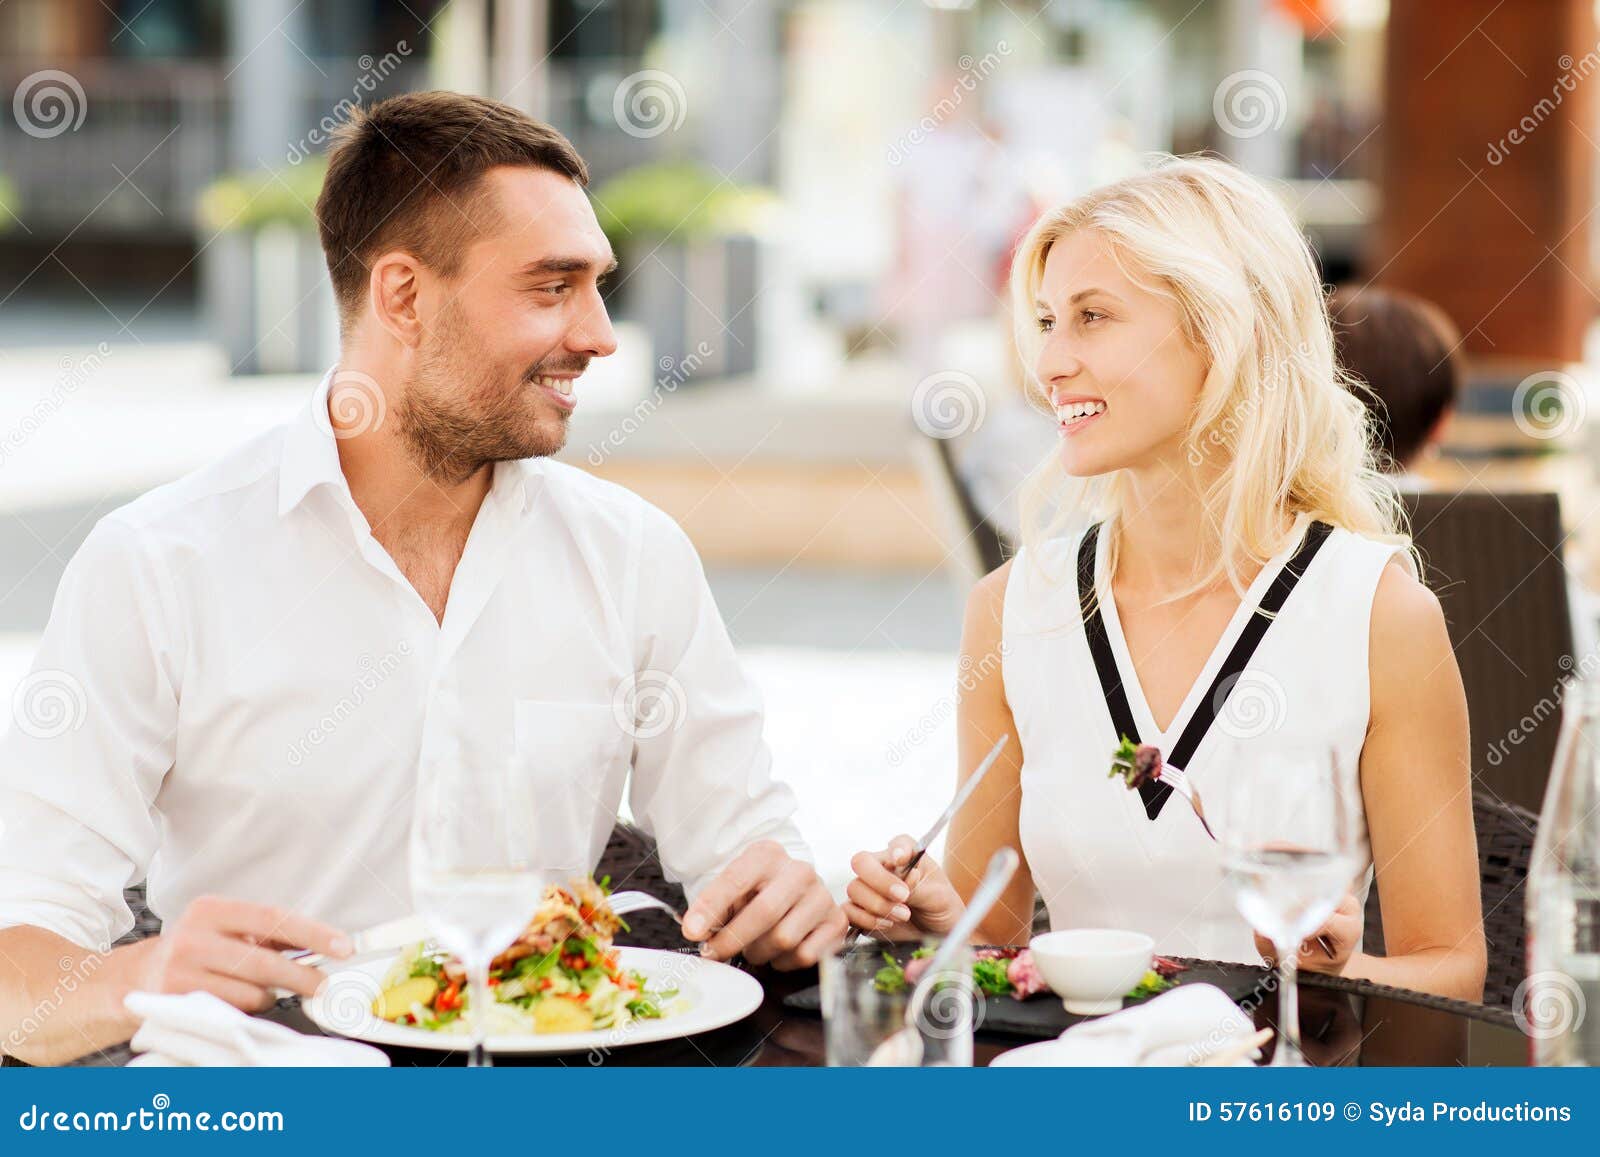 Happy Couple Eating Dinner at Restaurant Terrace Stock Image - Image of